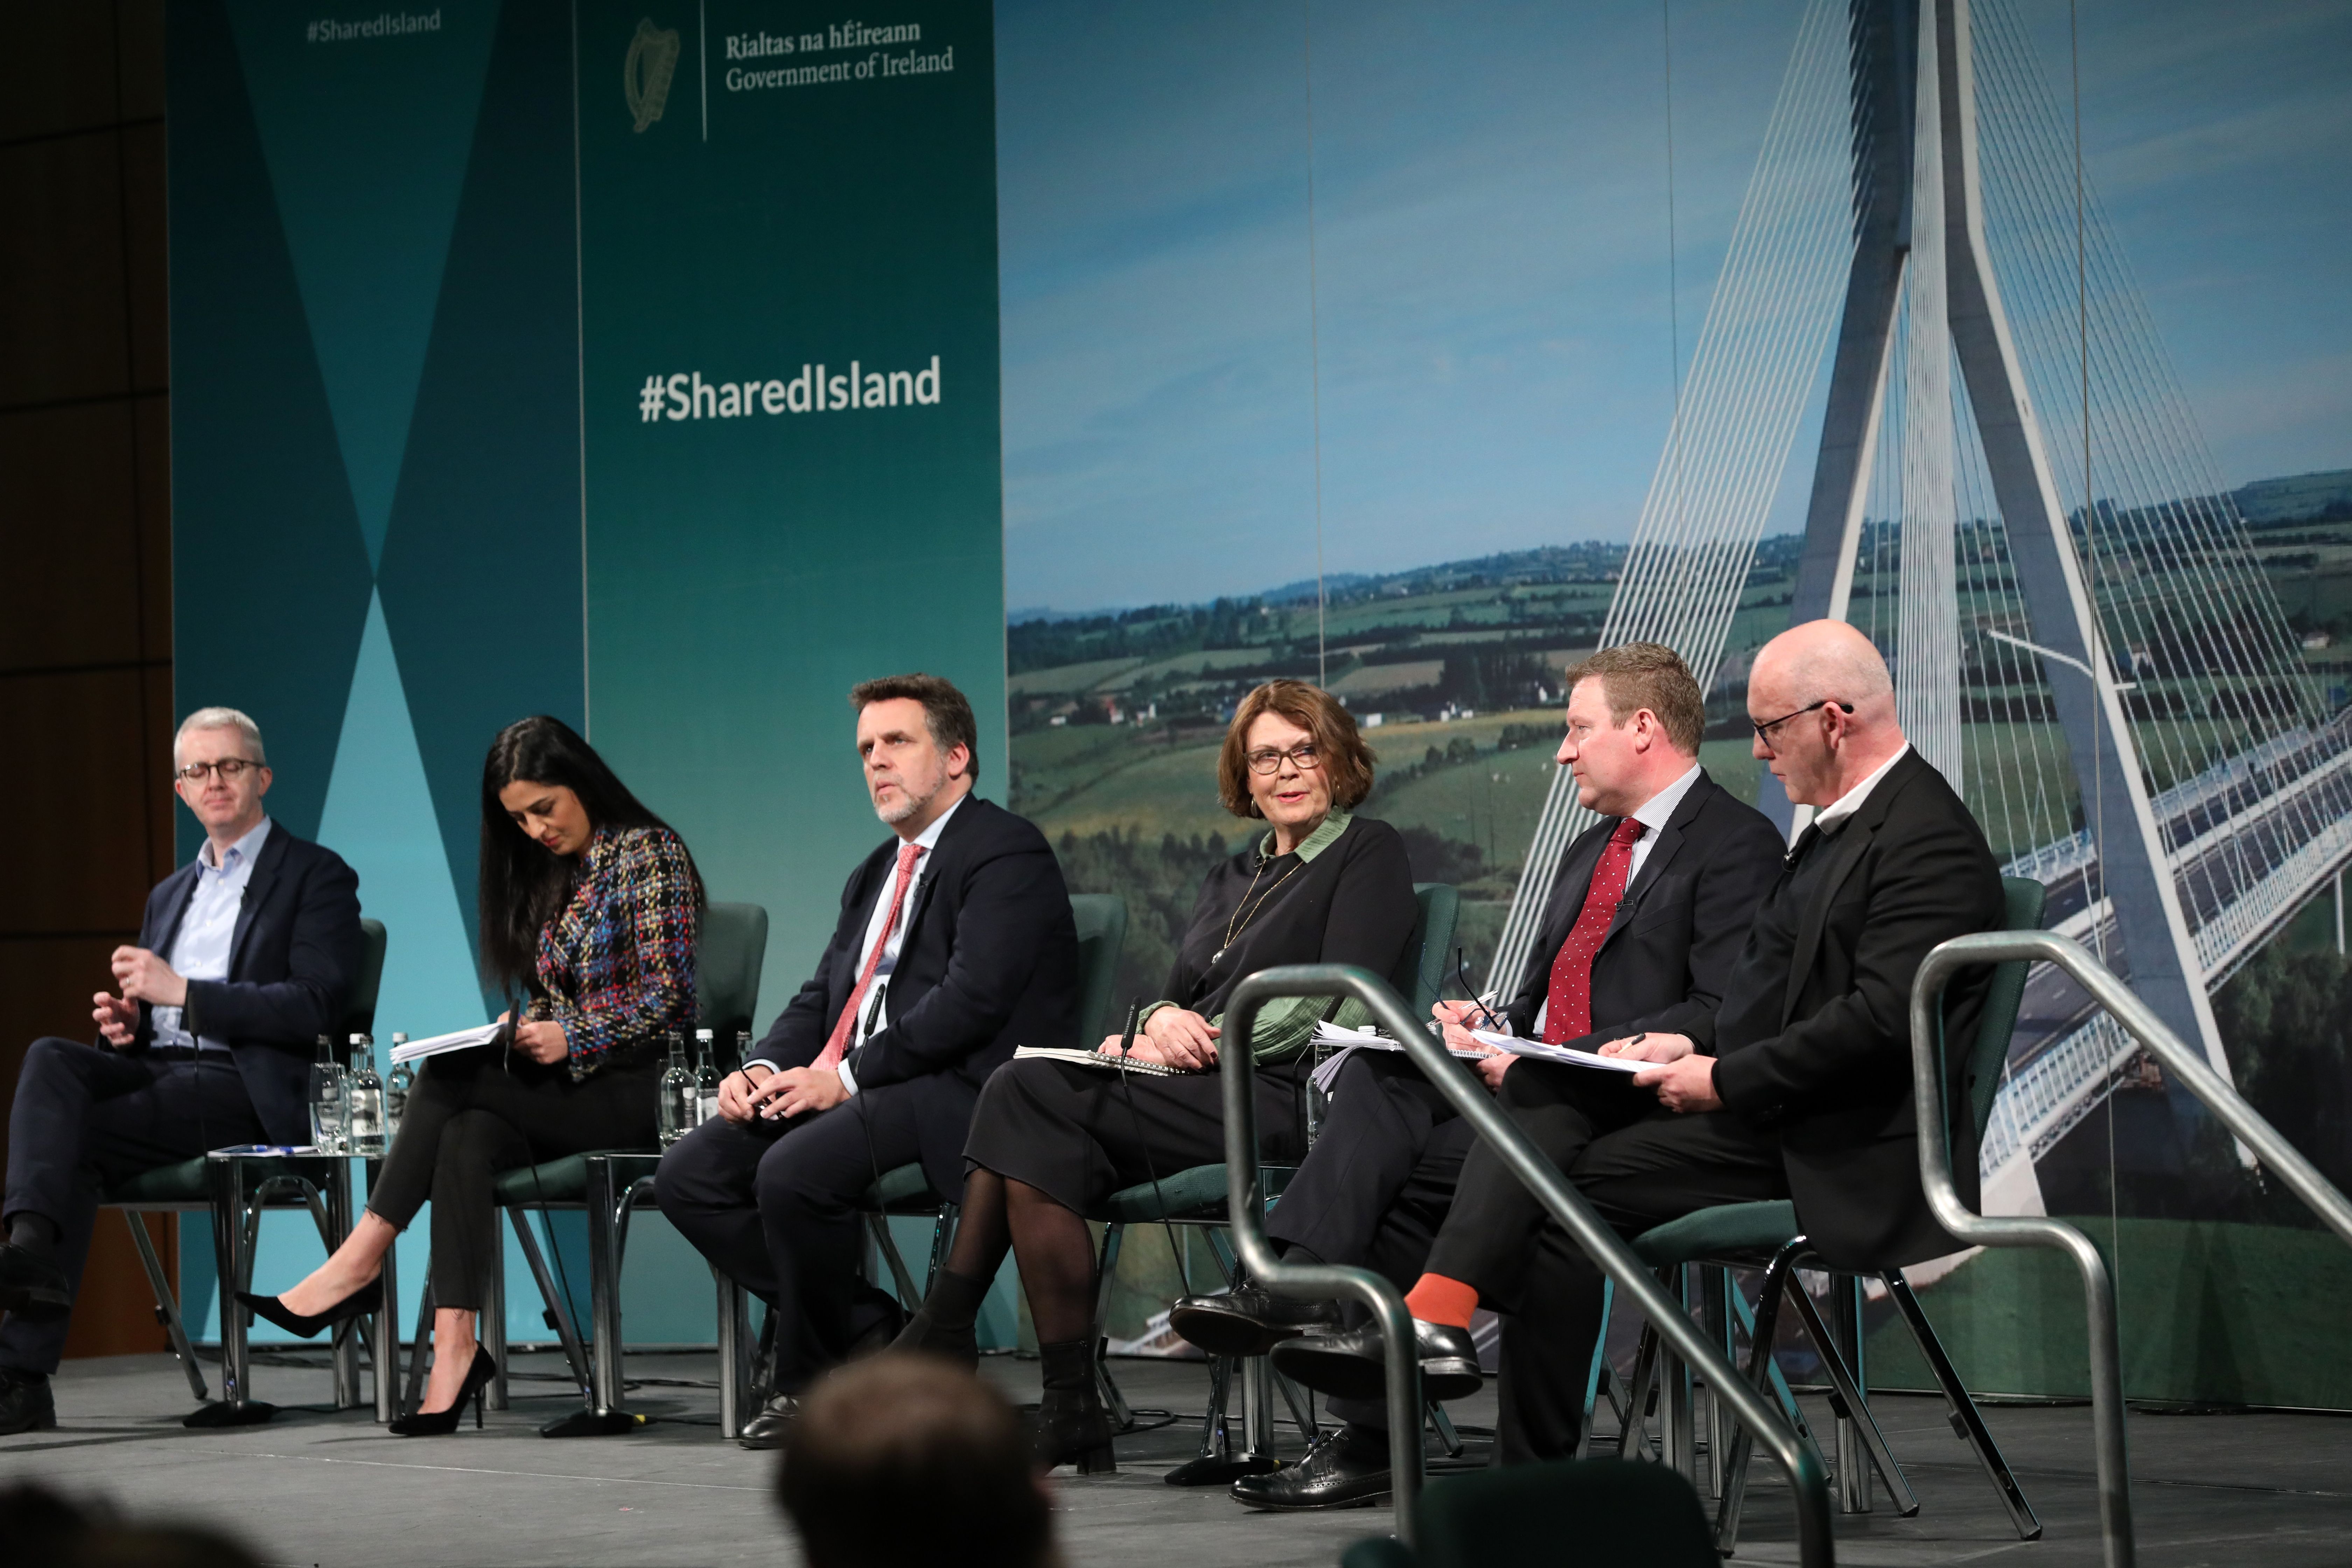 PANEL: Speakers at a Shared Island event in Dublin